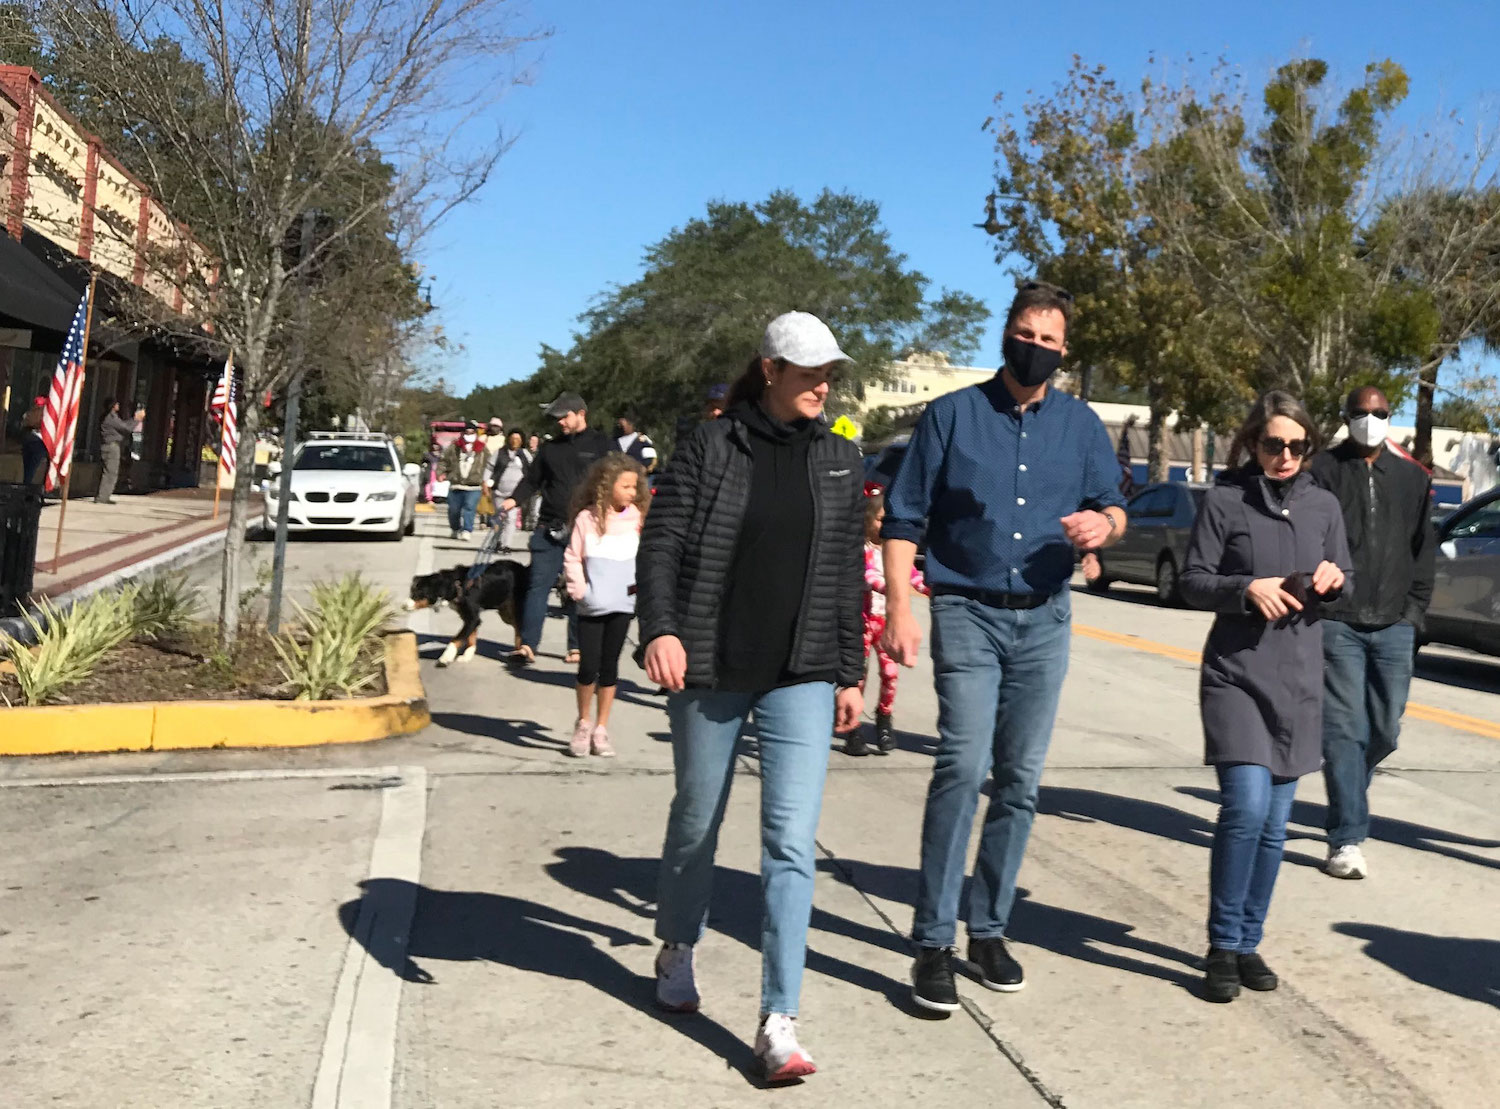 President Christopher Roellke, his daughter Julia and Elizabeth Skomp, dean of the College of Arts and Sciences, walk in the MLK Day march.